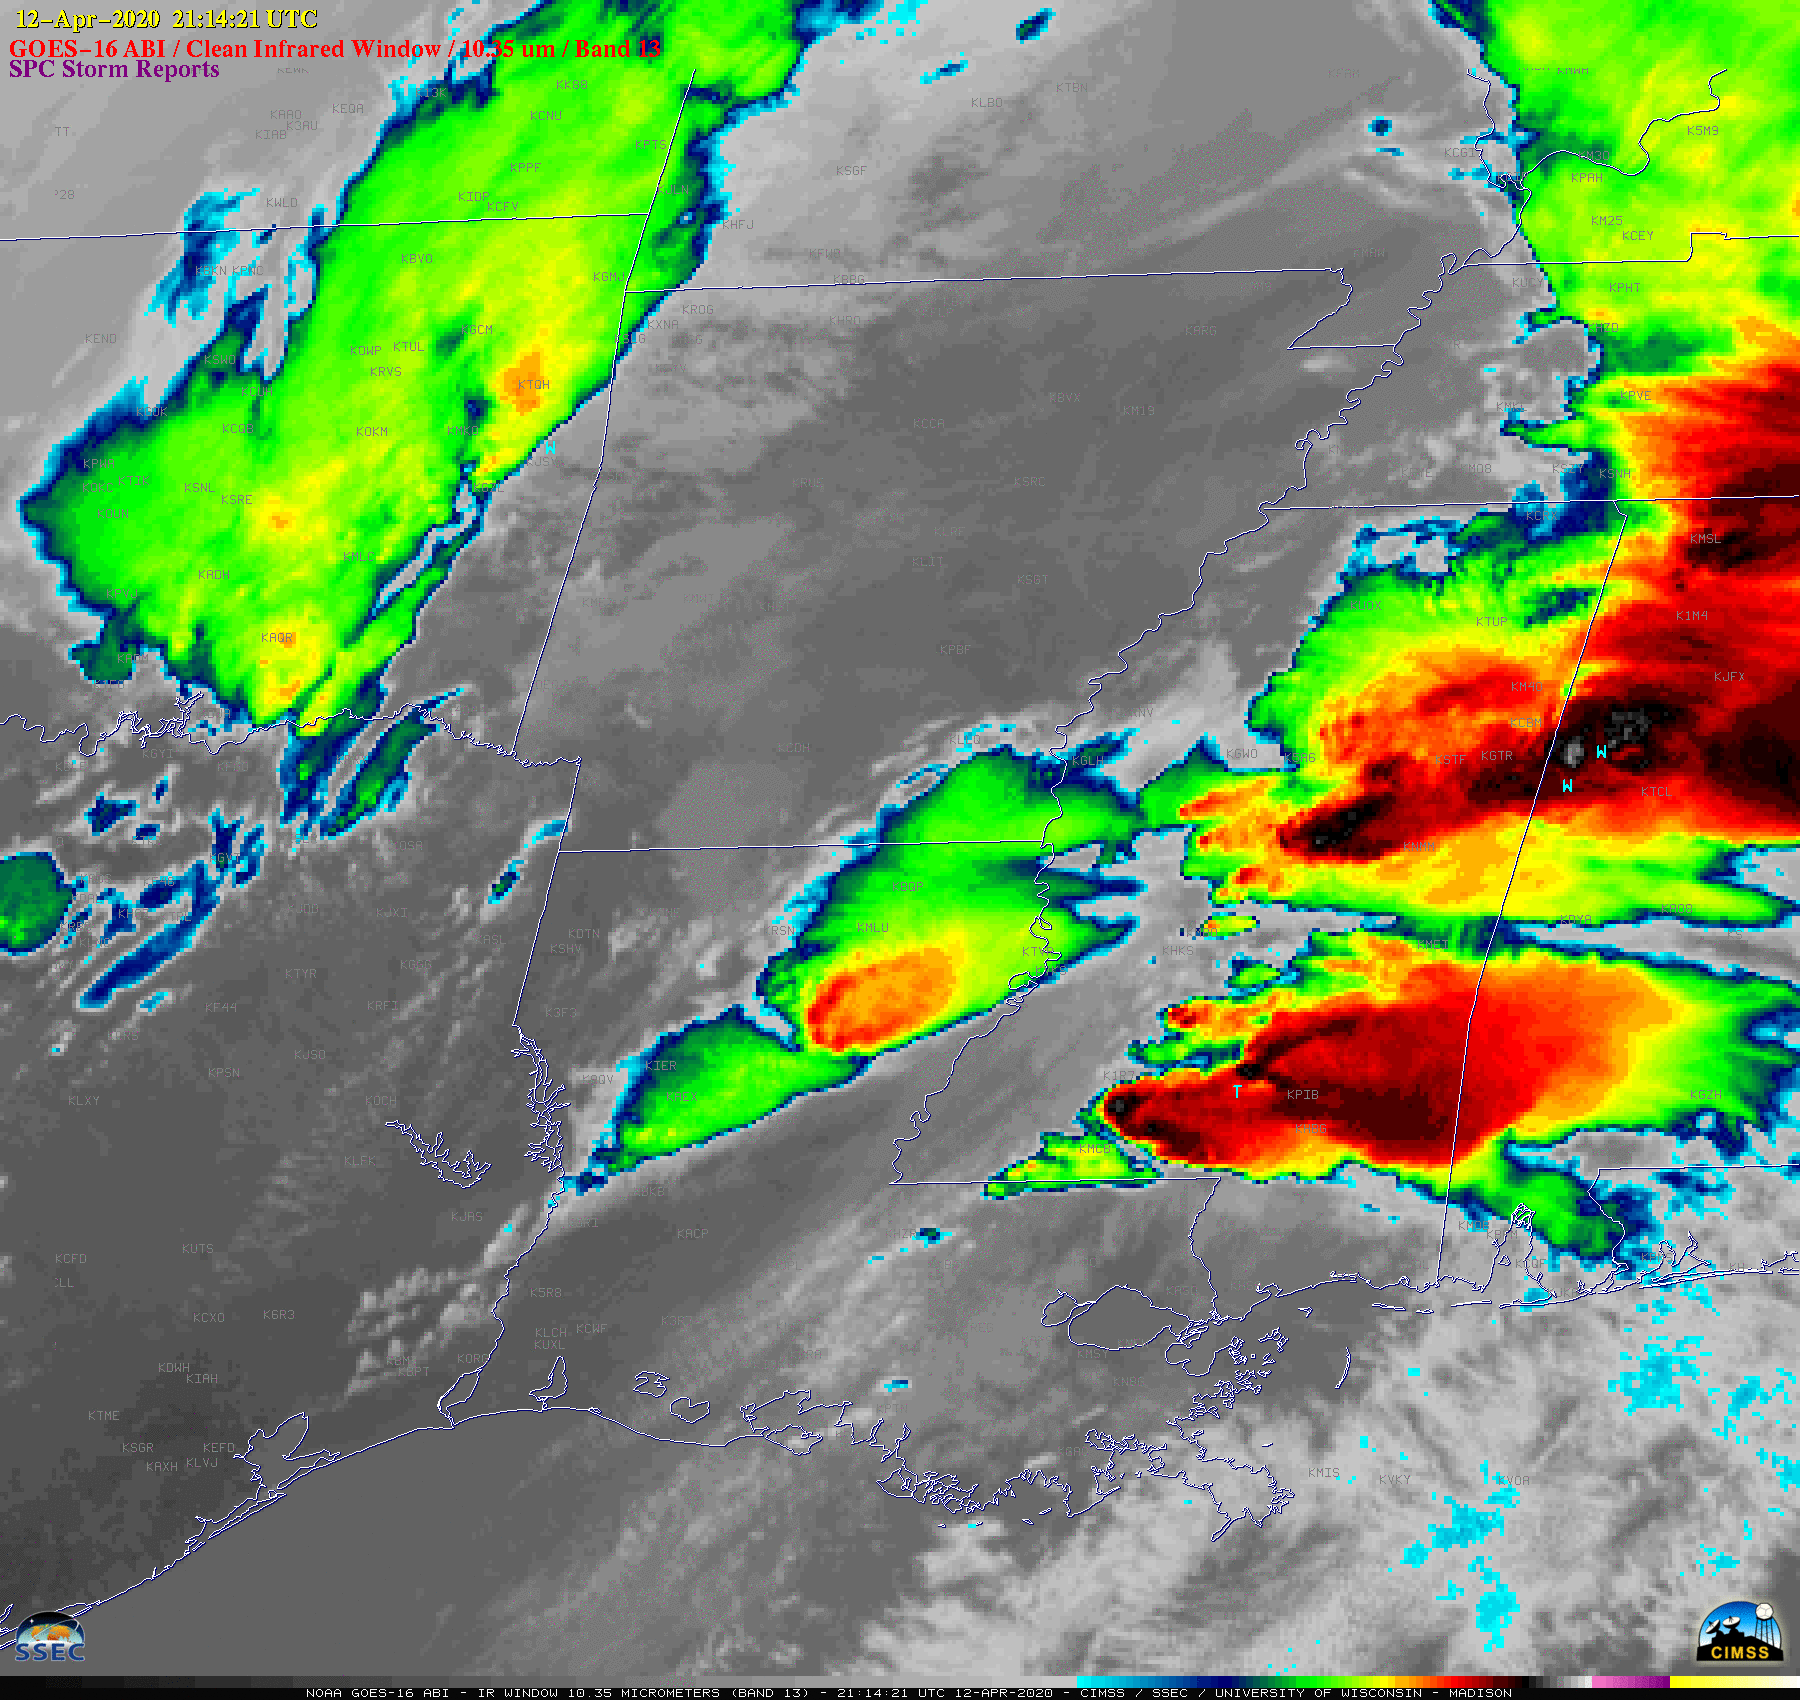 GOES-16 "Clean" Infrared Window (10.35 µm) images, with time-matched SPC Storm Reports plotted in cyan [click to play animation | MP4]